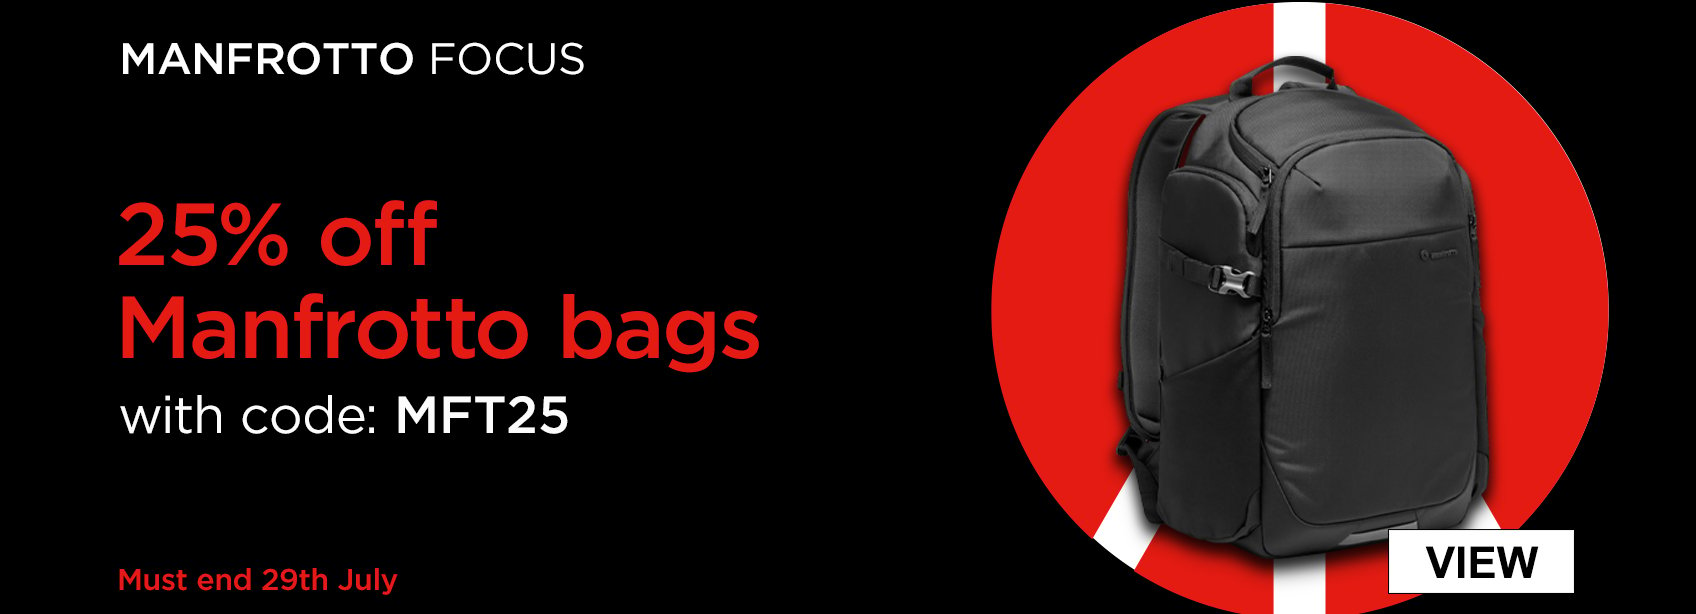 25% off Manfrotto bags with code MFT25